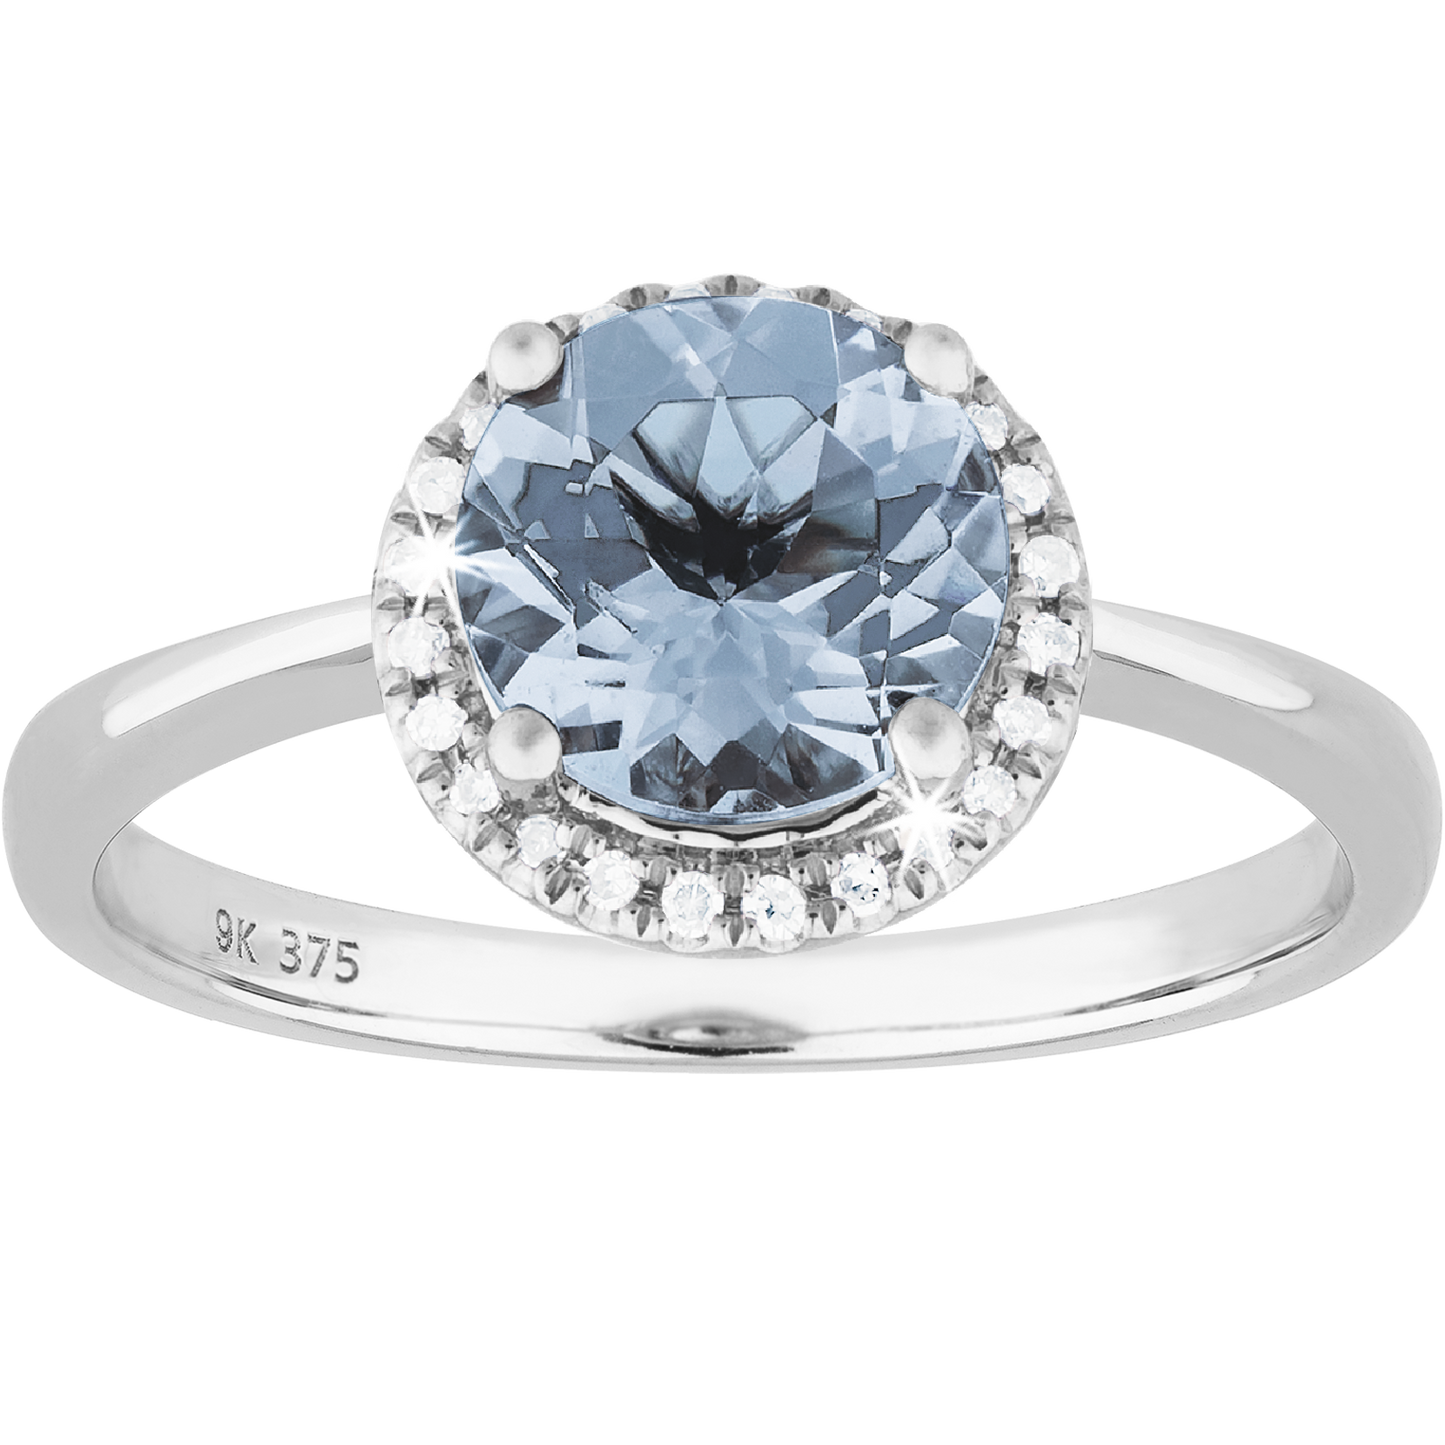 0.80ct Aquamarine Center with a Diamond Halo Ring in 9ct White Gold